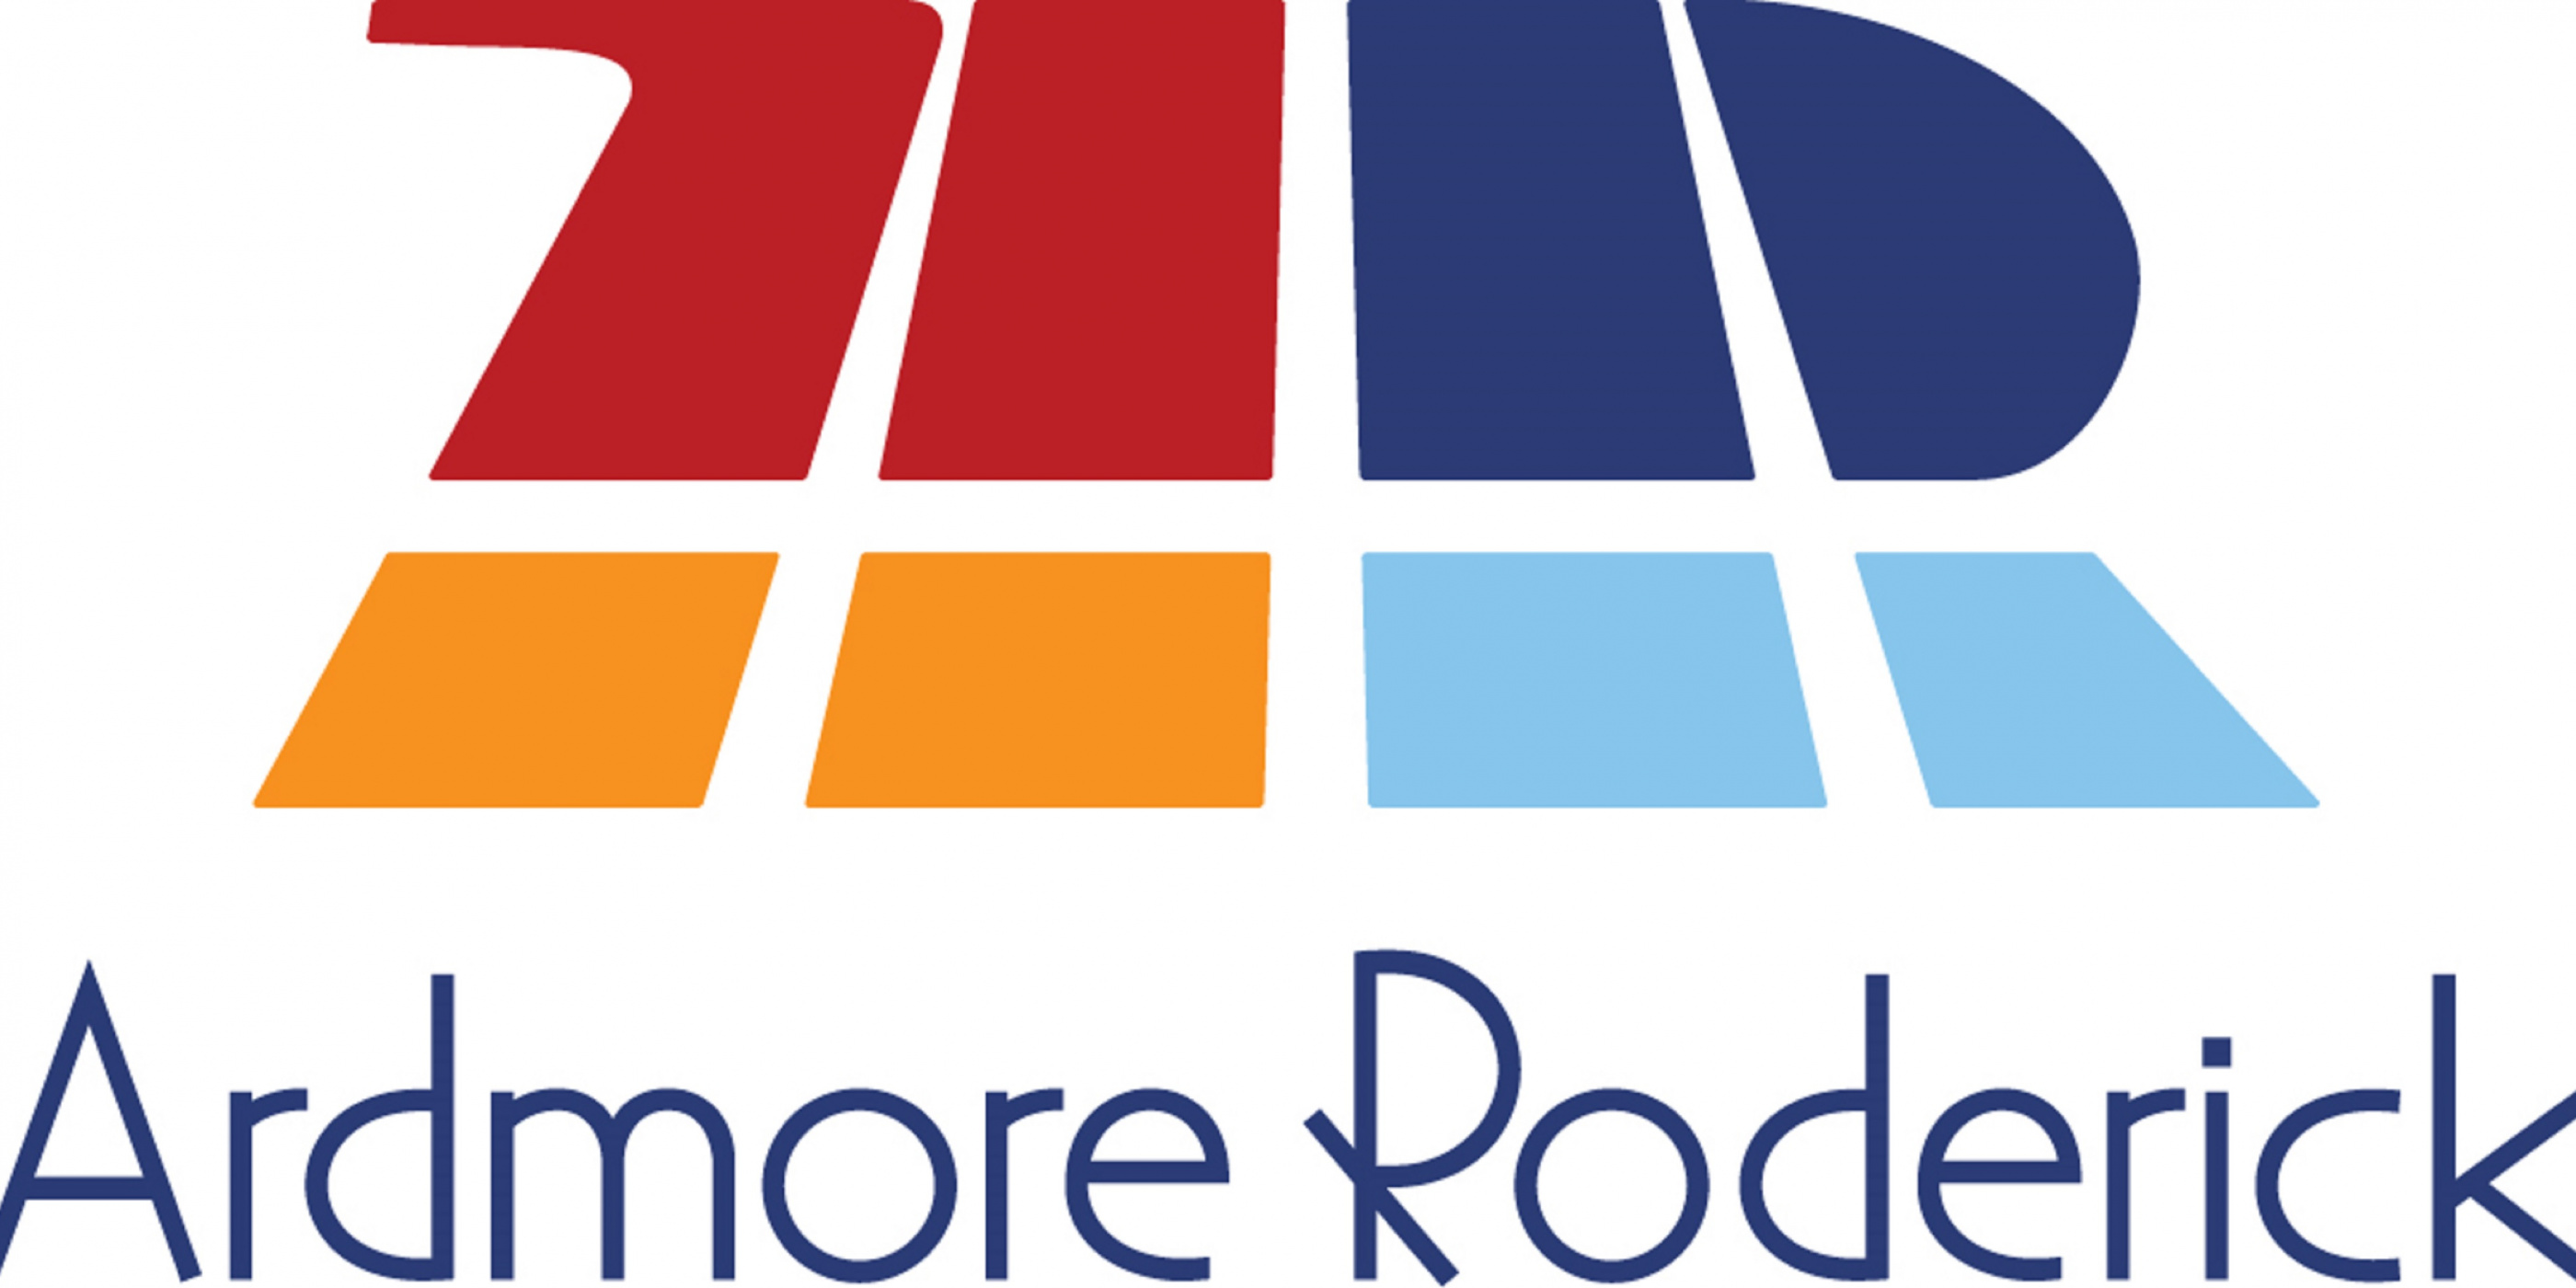 Engineering Firms Ardmore Roderick and Sargent & Lundy Launch Engineering Partnership